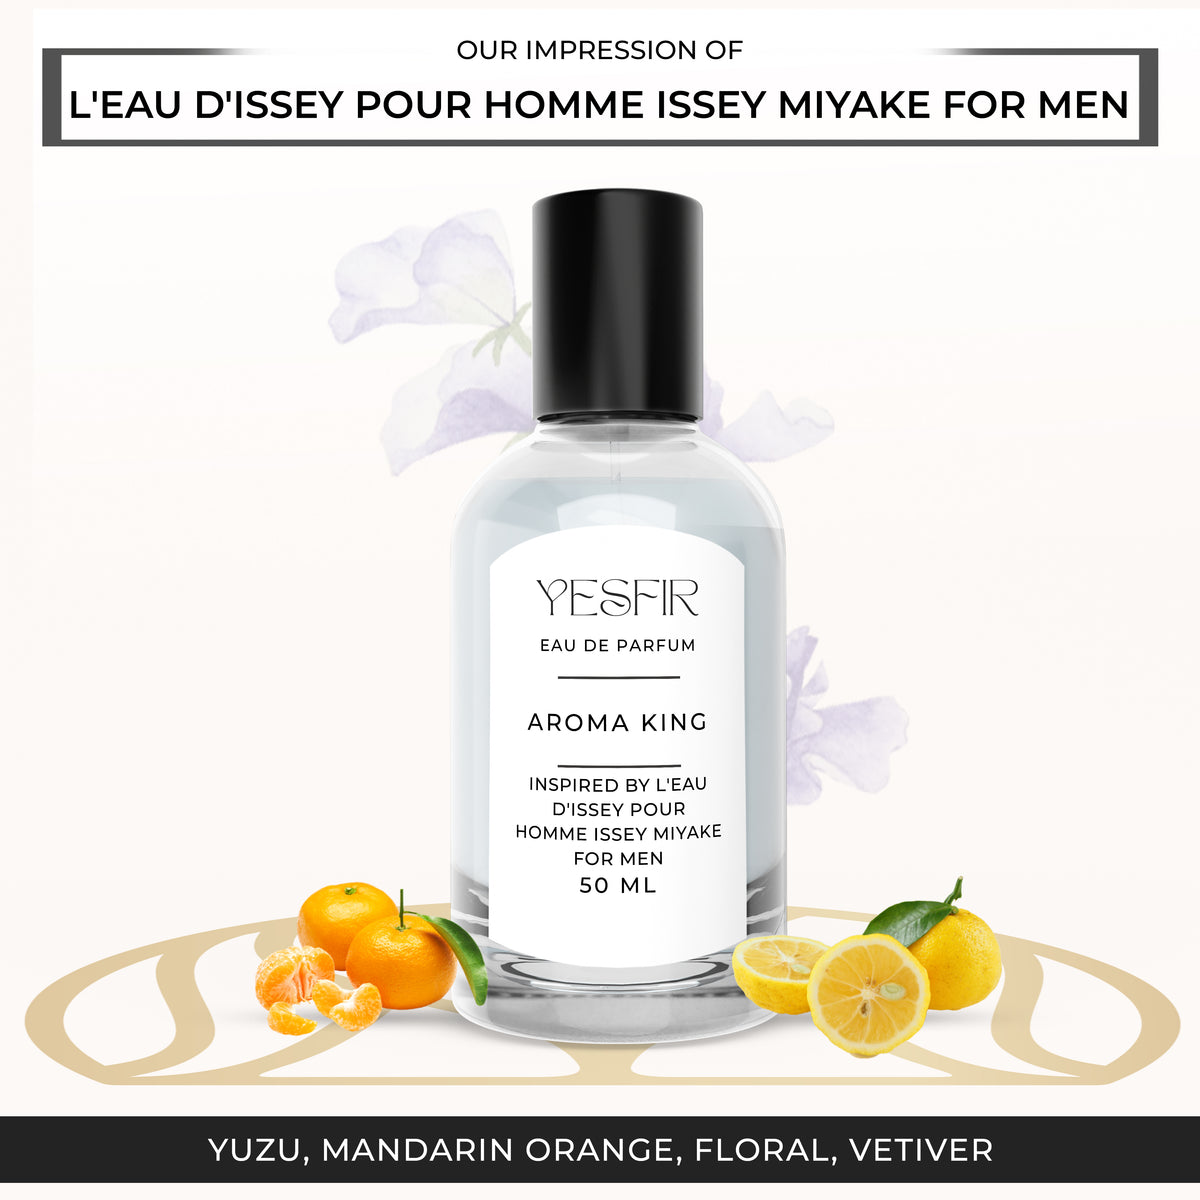 Aroma King - Inspired by L'eau d'Issey Pour Homme Issey Miyake for men